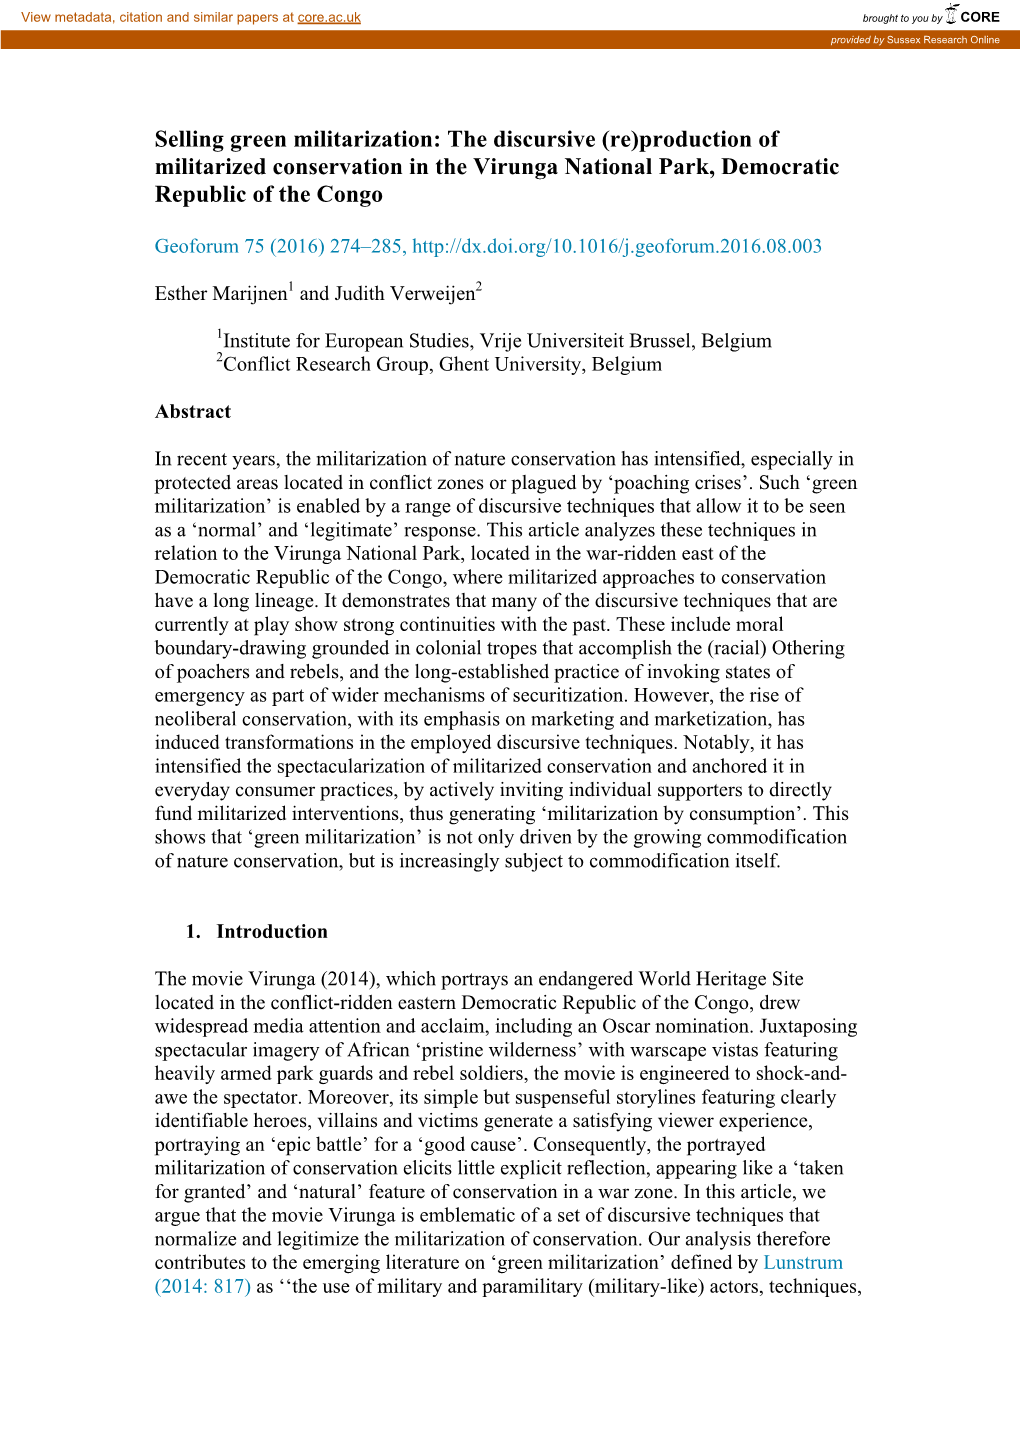 Selling Green Militarization: the Discursive (Re)Production of Militarized Conservation in the Virunga National Park, Democratic Republic of the Congo